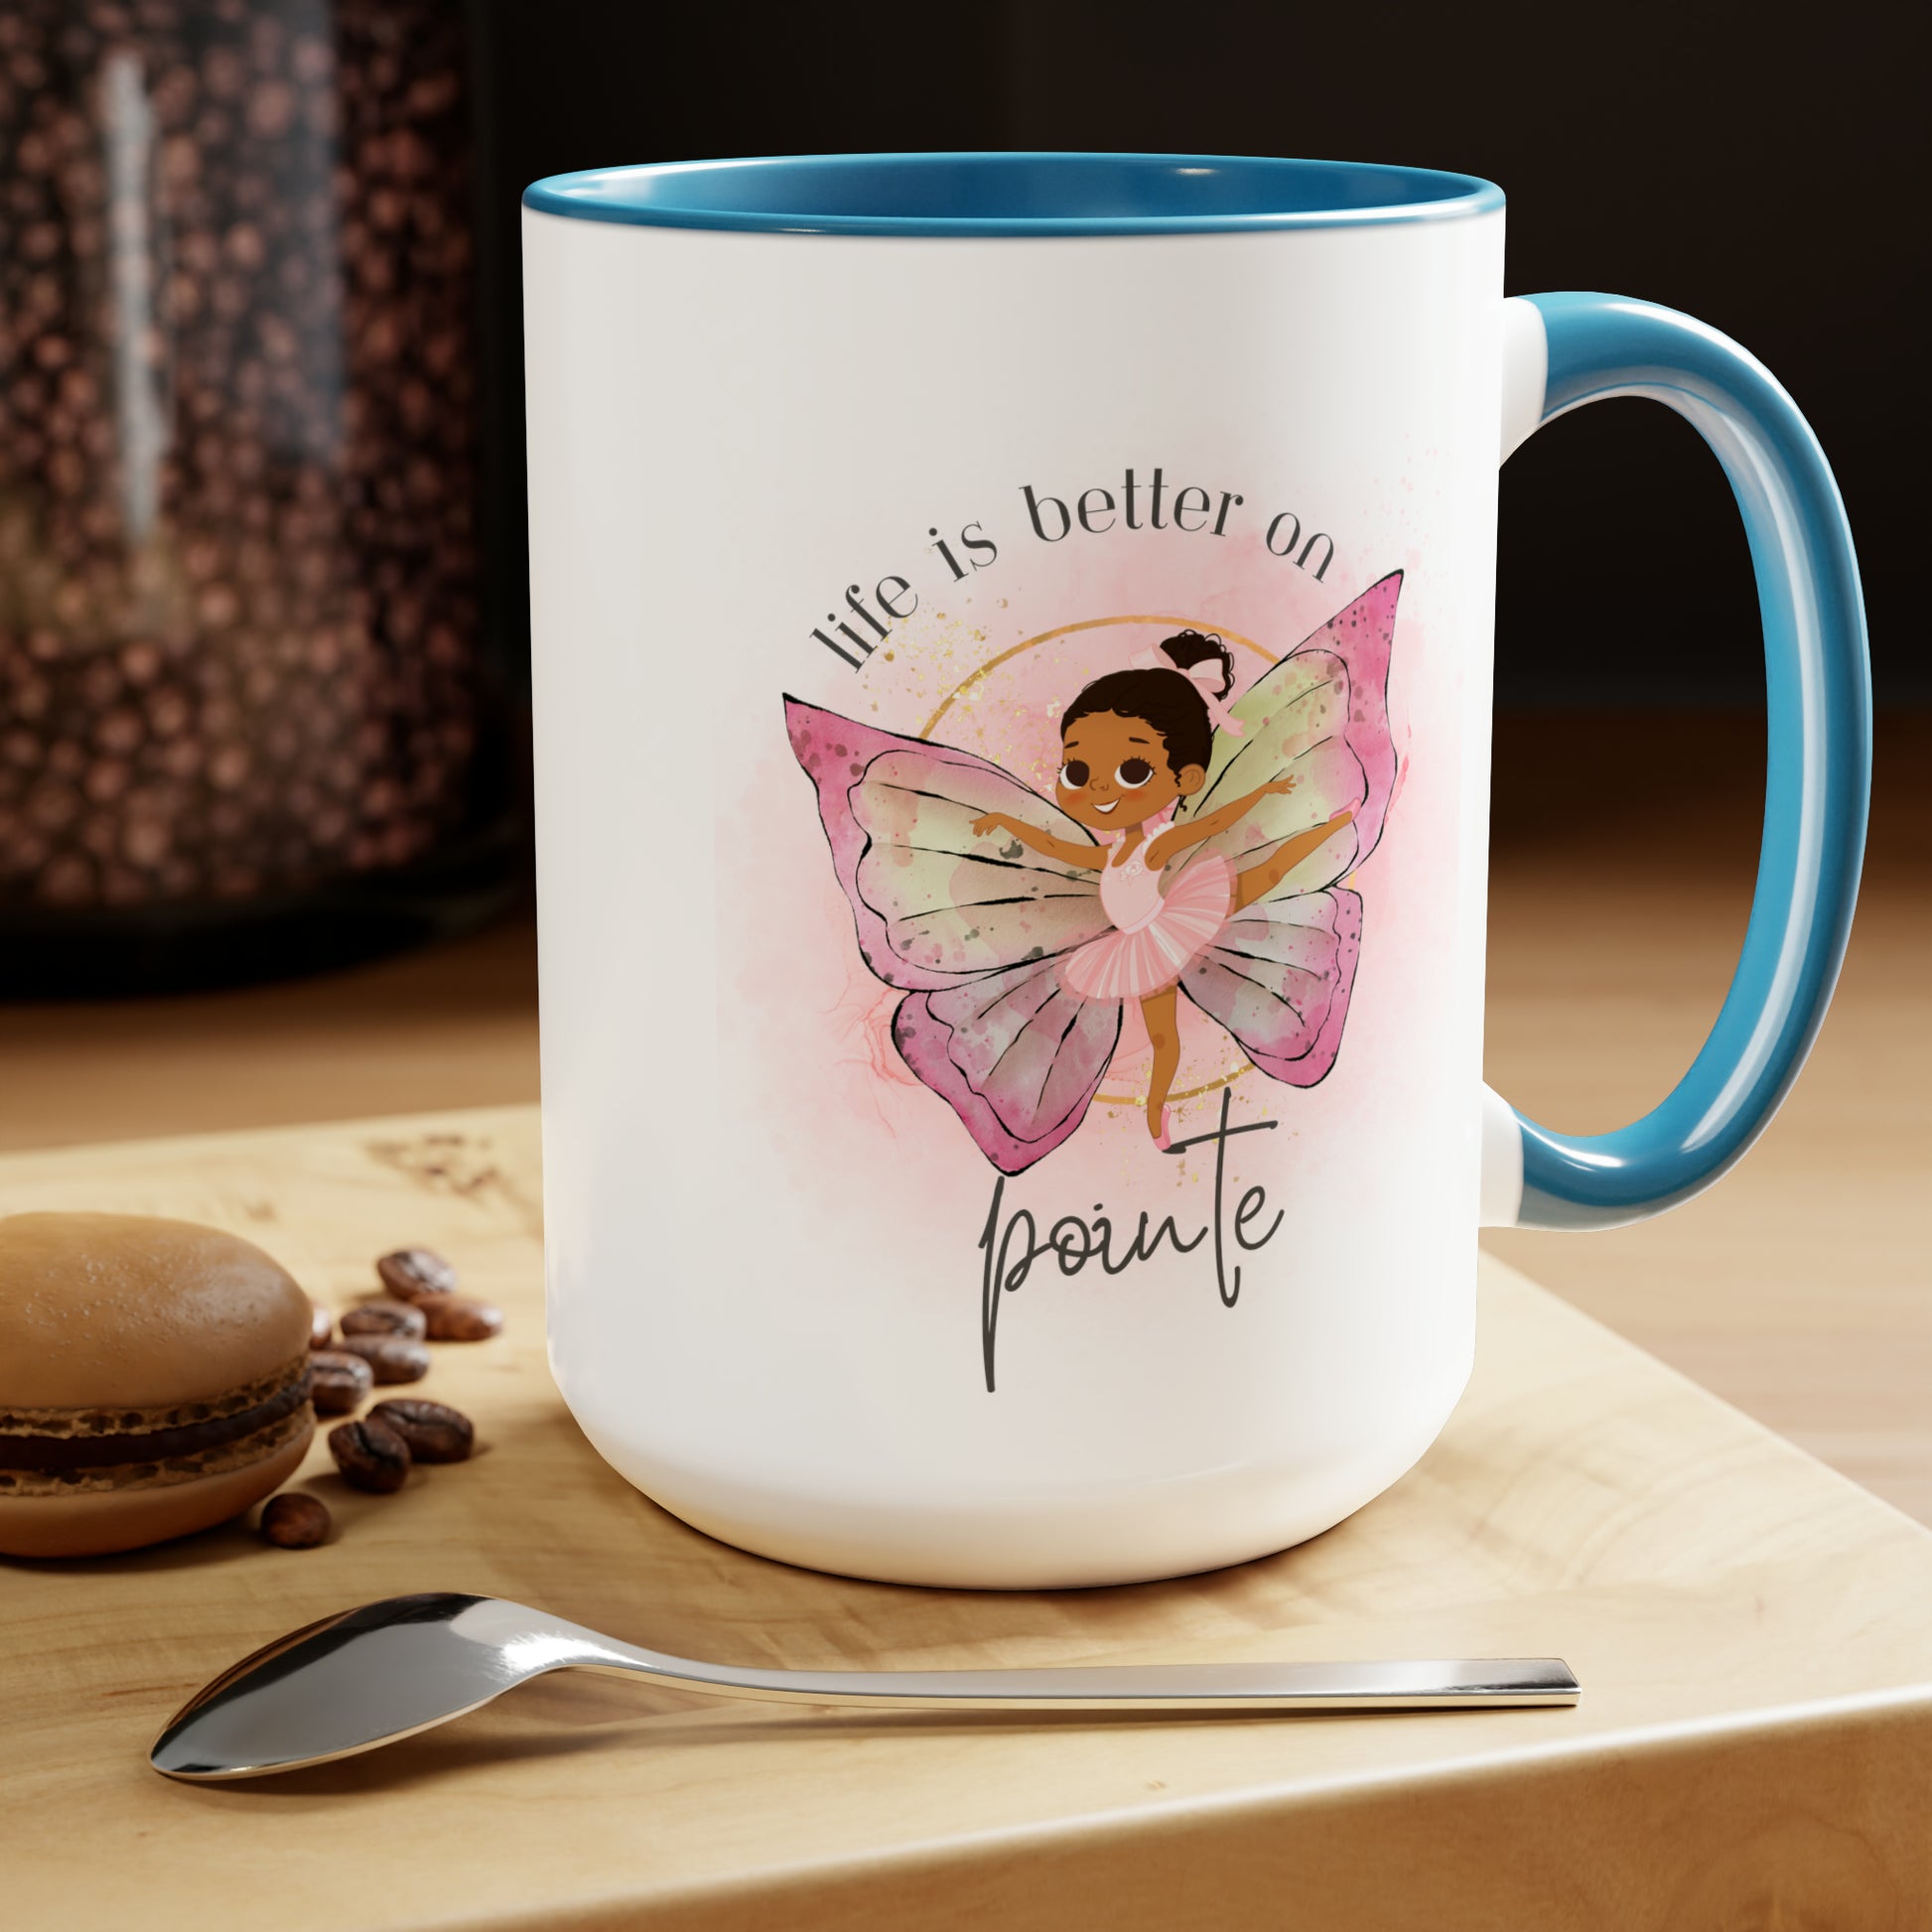 Two-Tone Coffee Mugs, 15oz - Young Ballerina - Life is better on pointe - blue rim